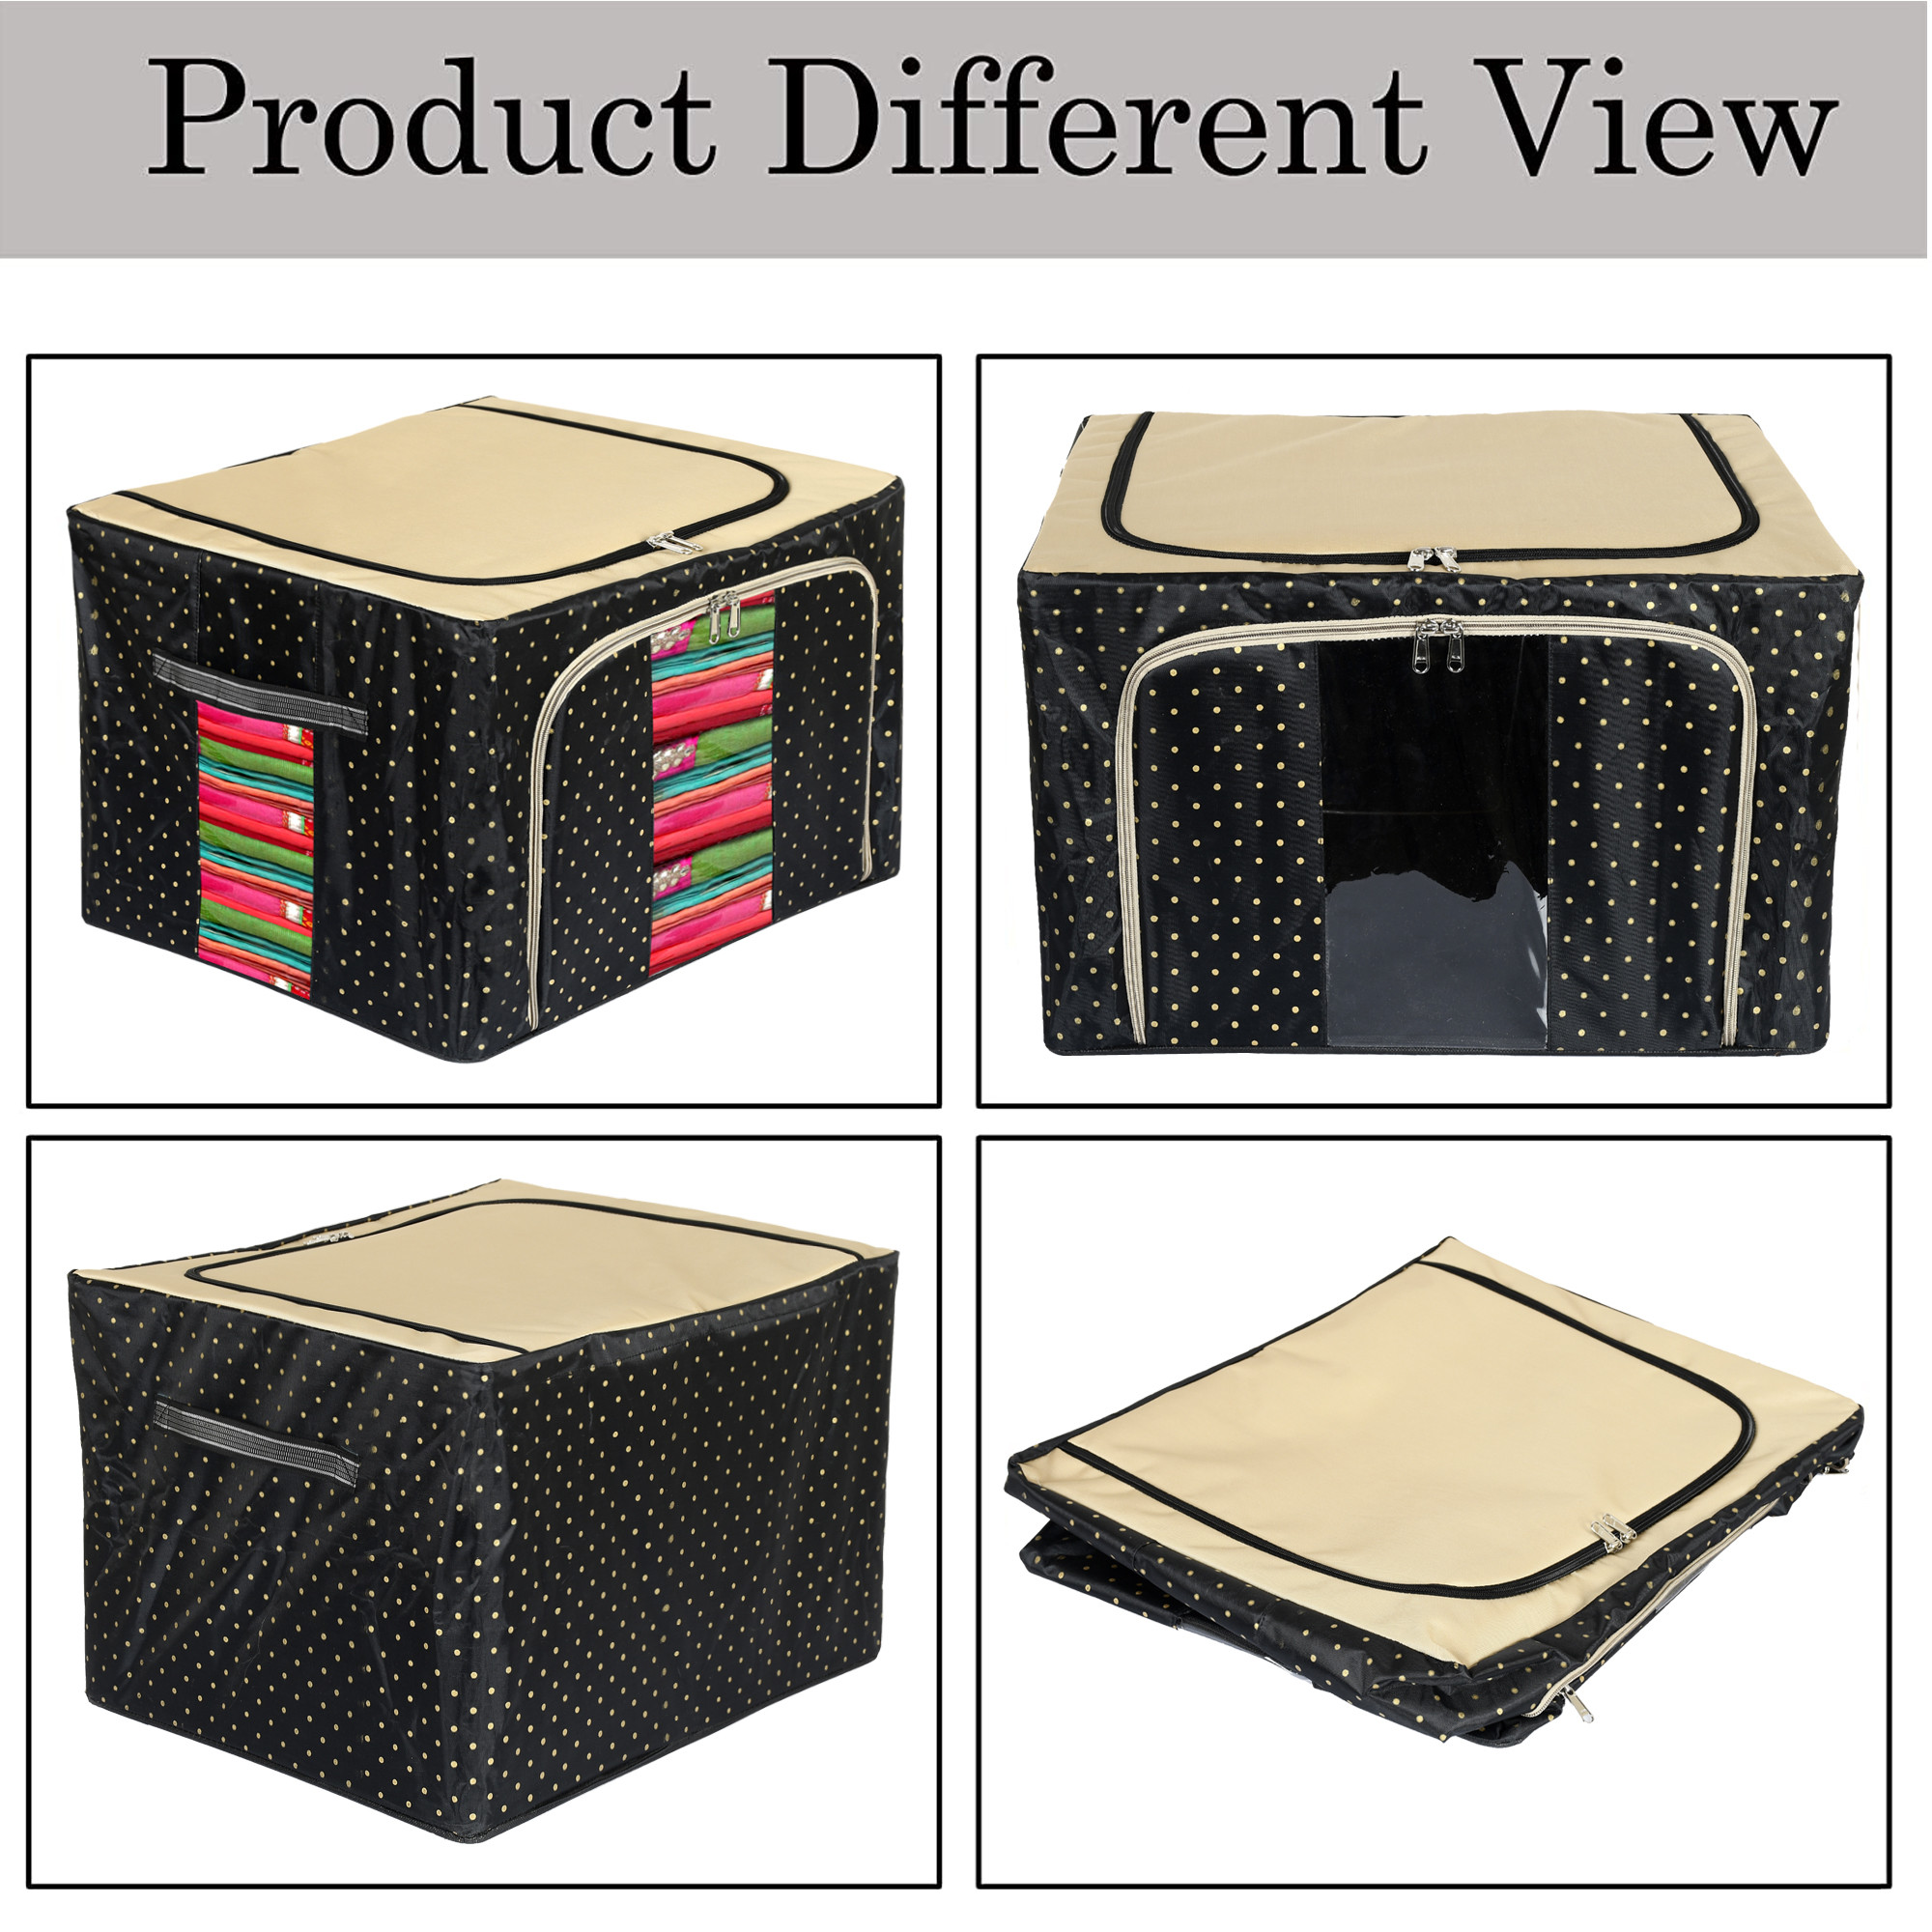 Kuber Industries Dot Printed Steel Frame Storage Box/Organizer For Clothing, Blankets, Bedding With Clear Window, 88Ltr. (Black & Grey)-44KM0269